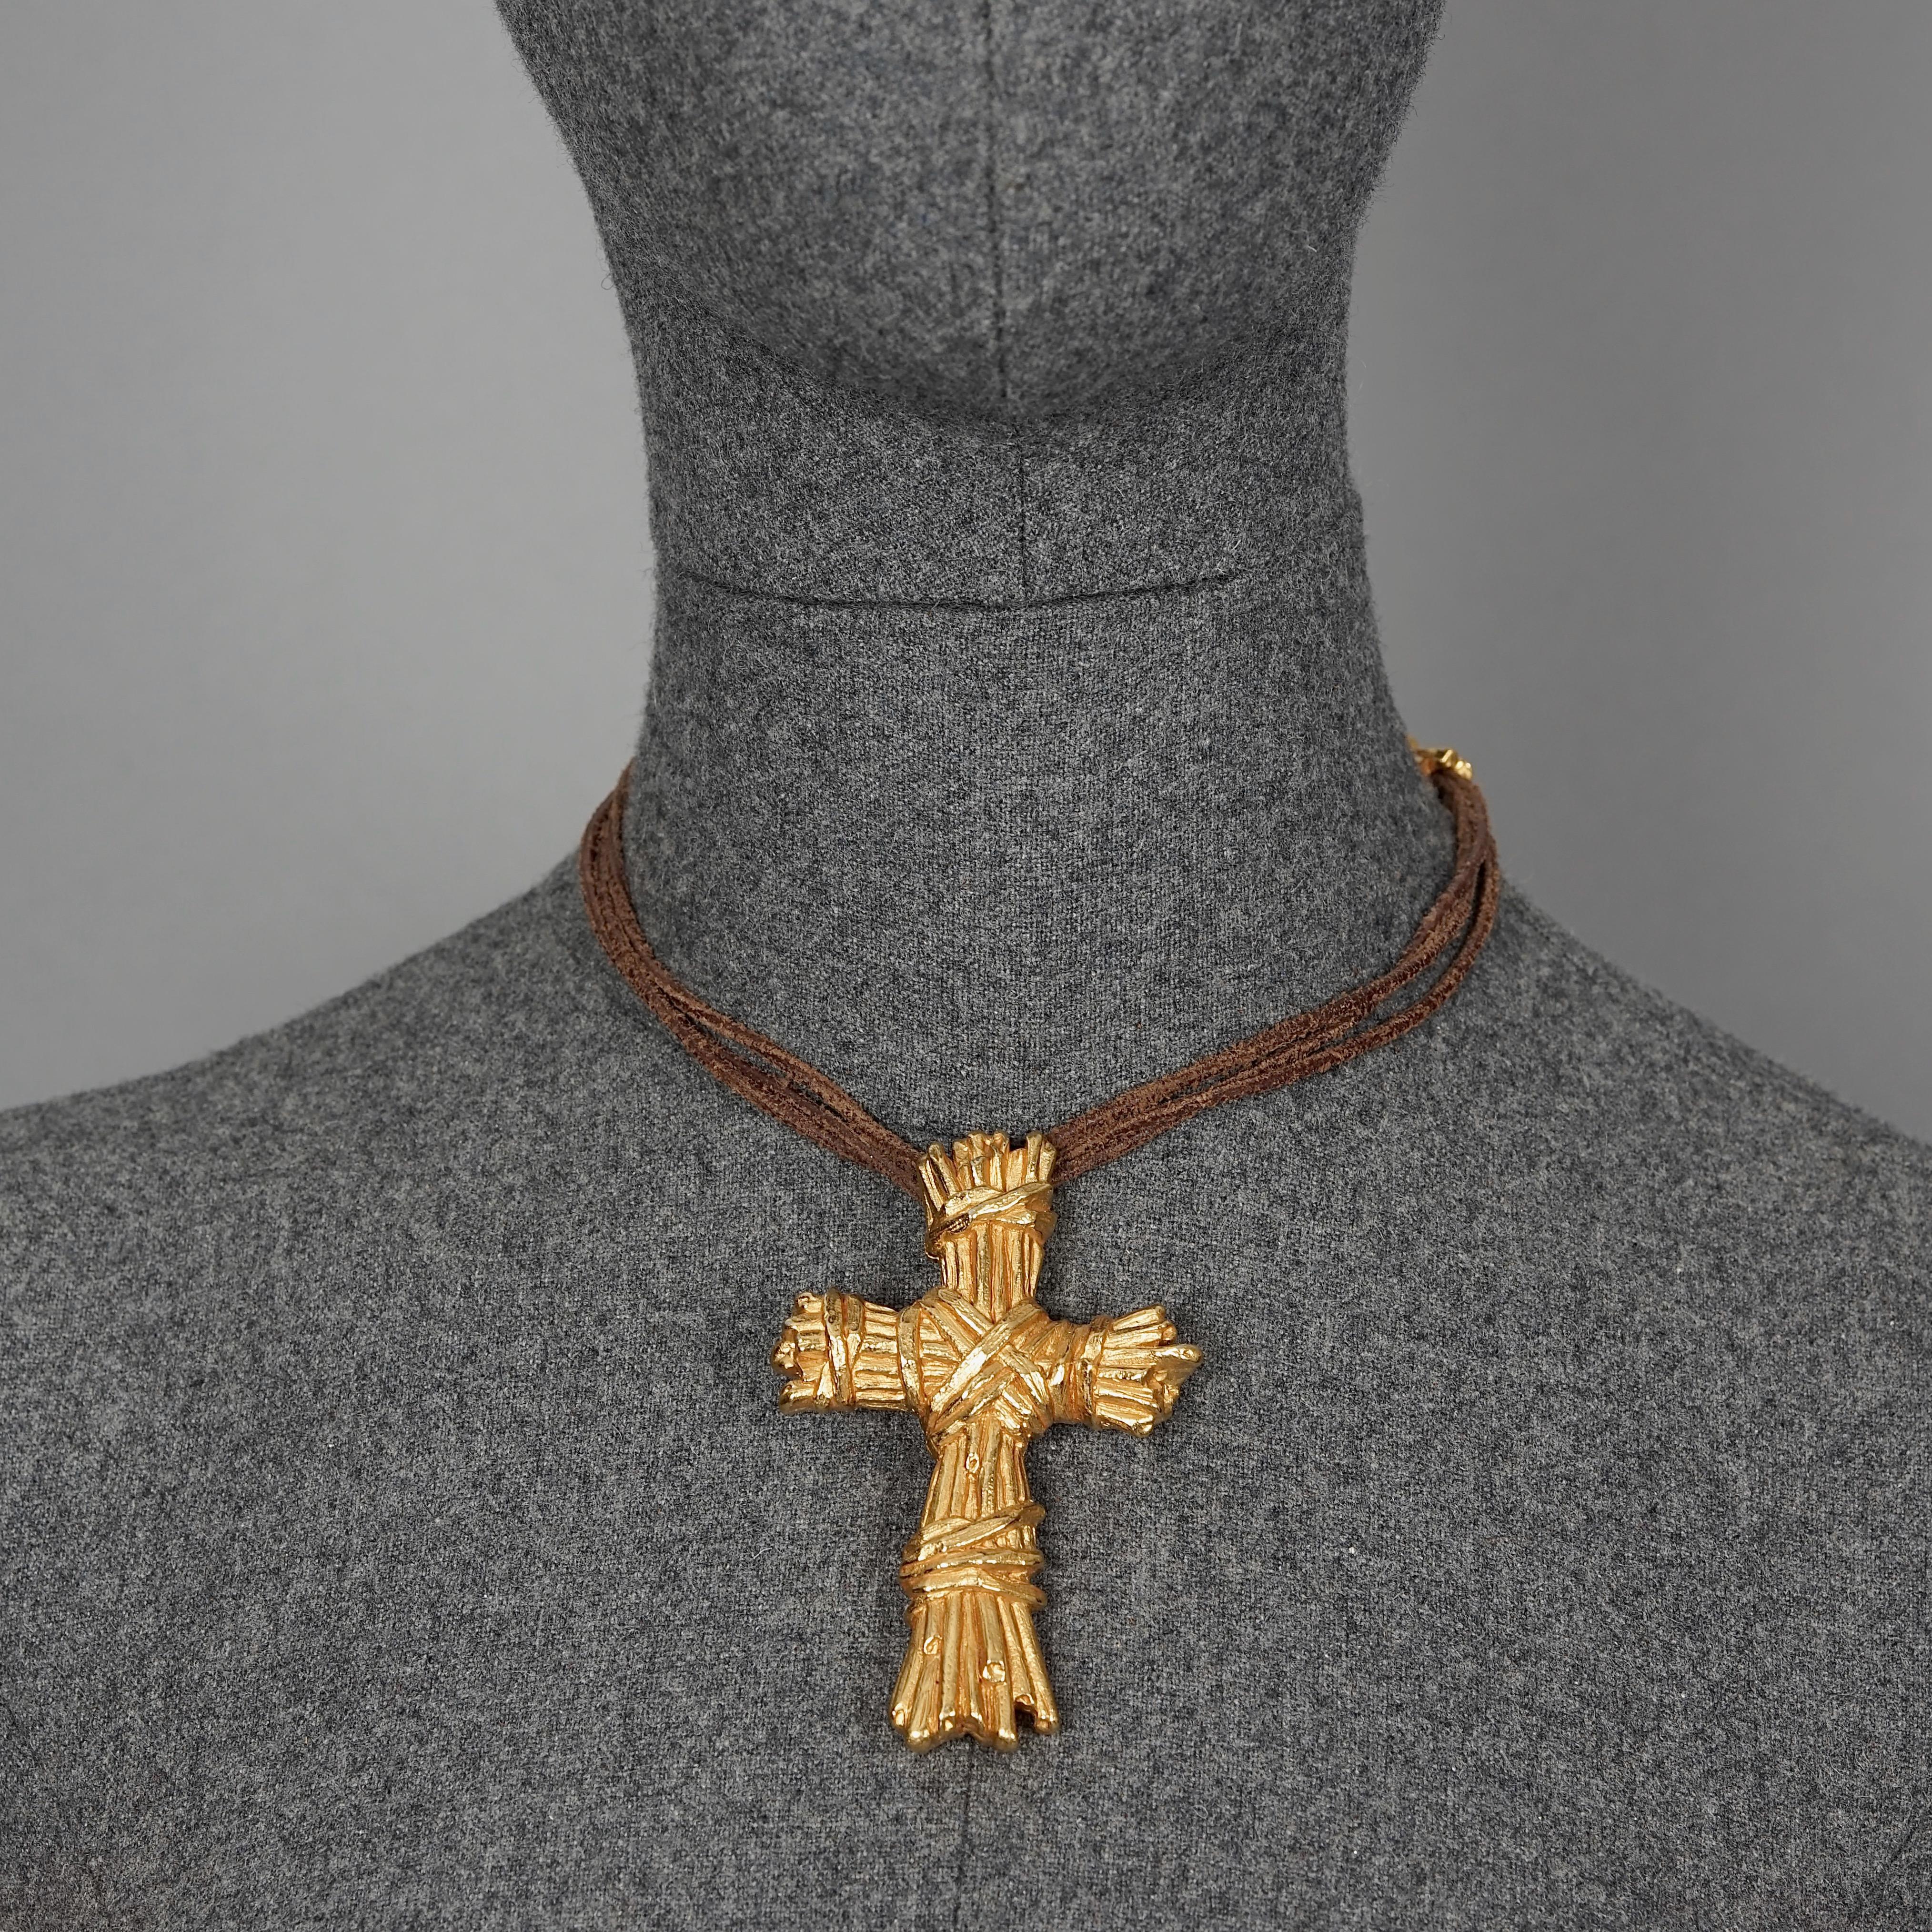 Vintage CHRISTIAN LACROIX Ribbed Textured Cross Leather Strap Necklace

Measurements:
Height : 3.27 inches (8.3 cm)
Width: 2.20 inches (5.6 cm)
Wearable Length: 14.96 inches to 16.14 inches (38 cm to 41 cm)

Features:
- 100% Authentic CHRISTIAN